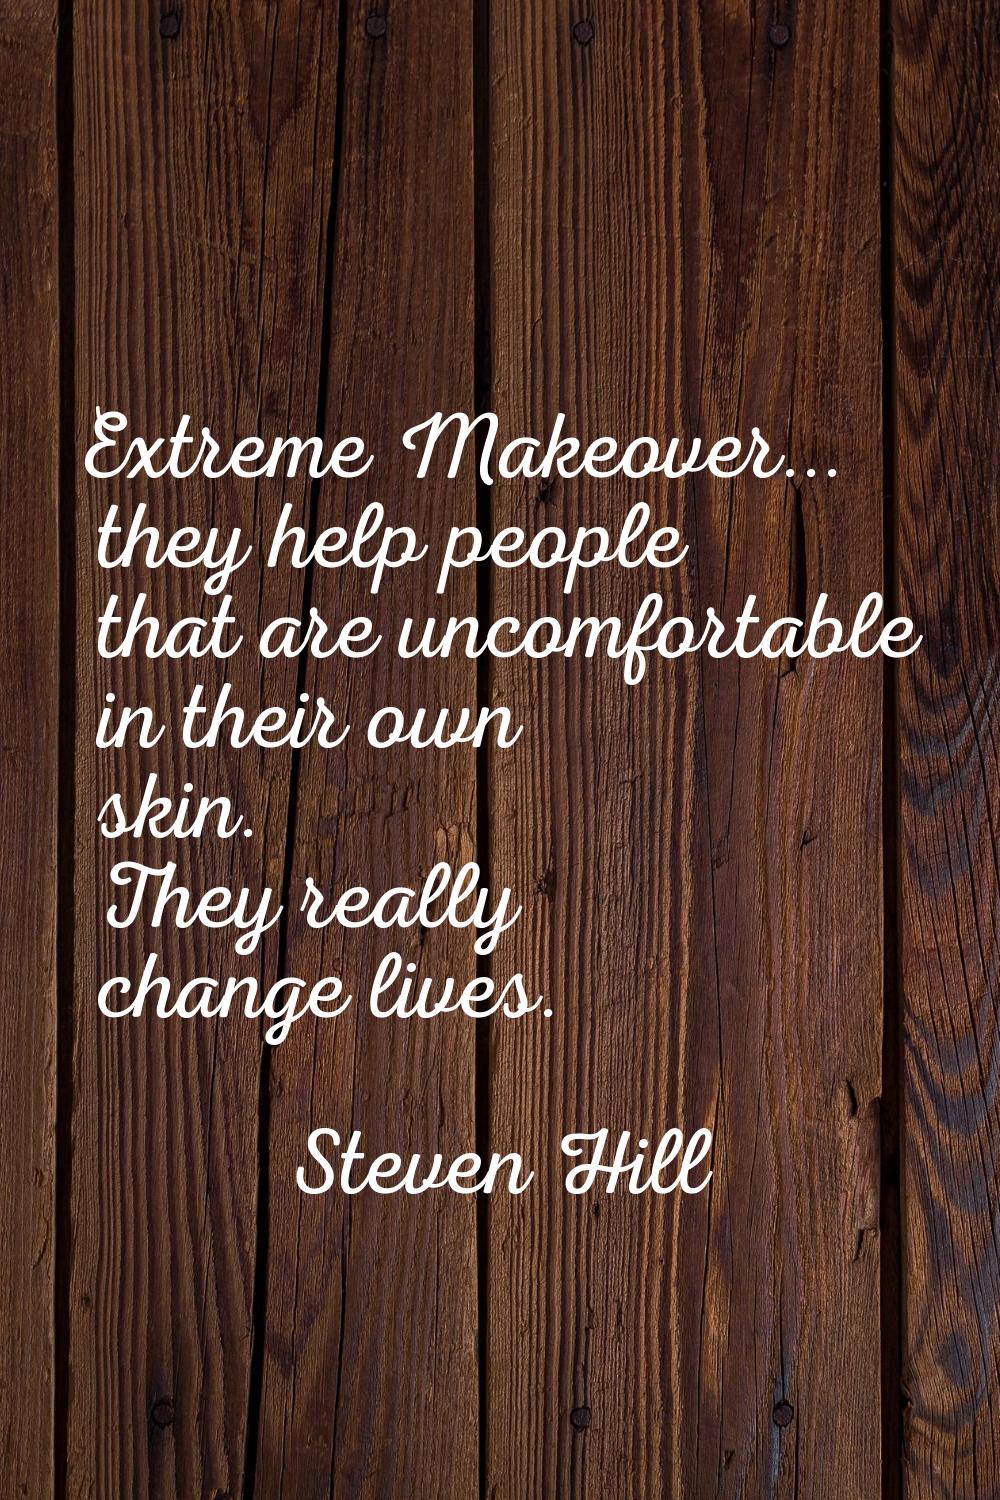 Extreme Makeover... they help people that are uncomfortable in their own skin. They really change l